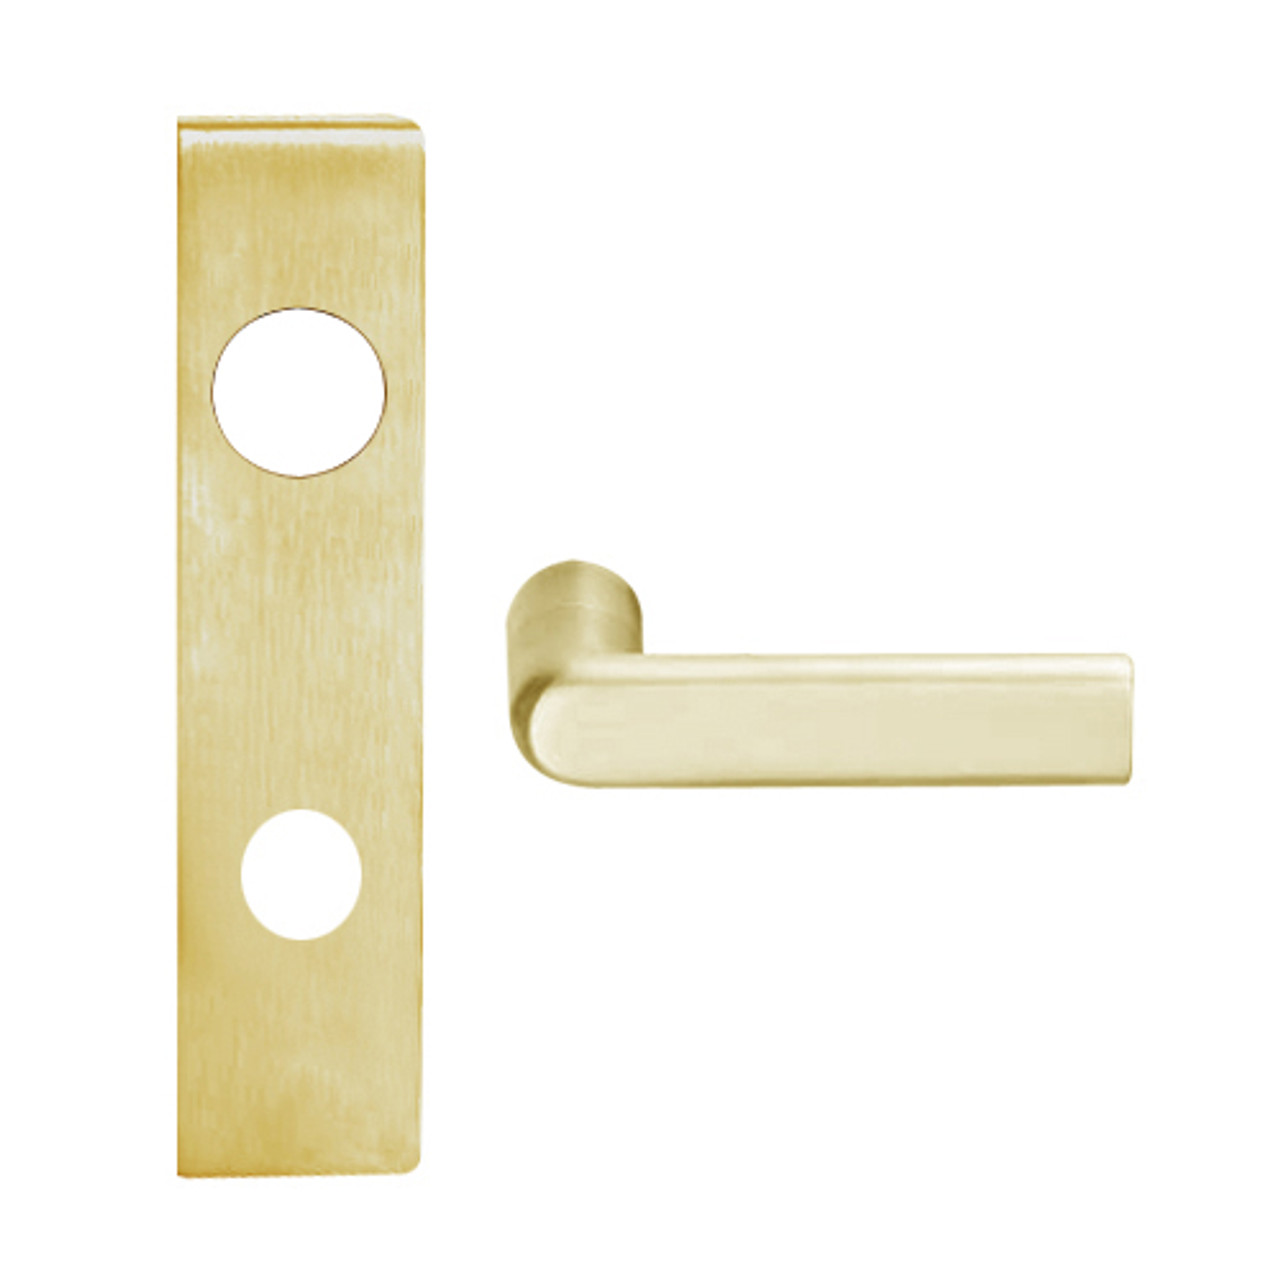 L9026J-01L-606 Schlage L Series Exit Lock with Cylinder Commercial Mortise Lock with 01 Cast Lever Design Prepped for FSIC in Satin Brass